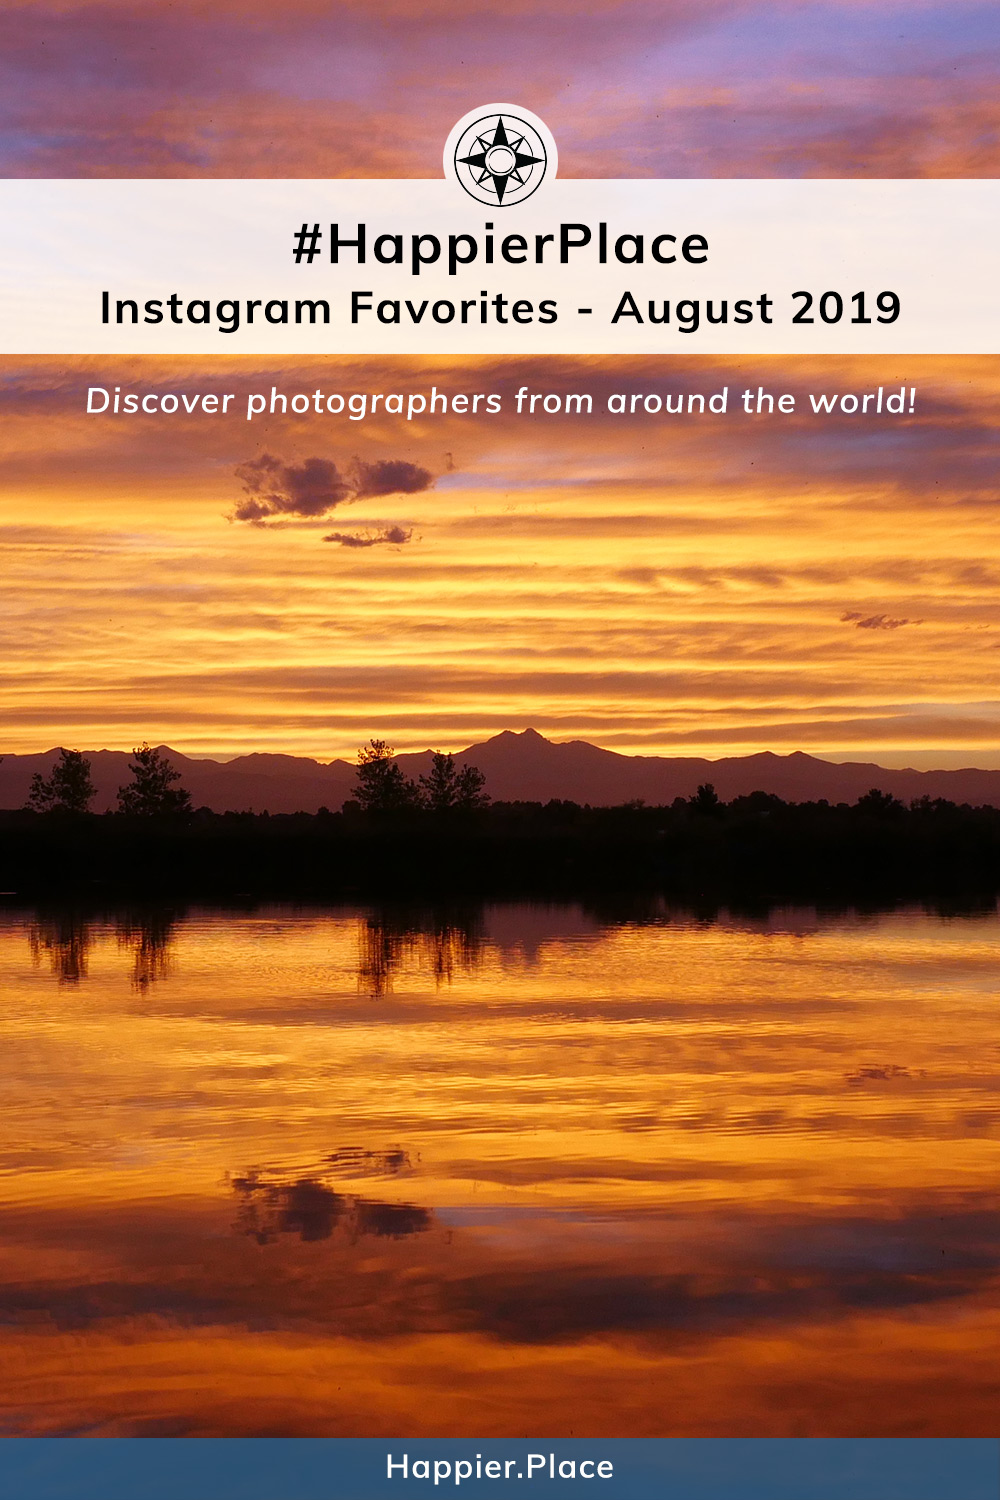 Instagram #HappierPlace August 2019 Favorites - represented by sunset reflection in Colorado lake.